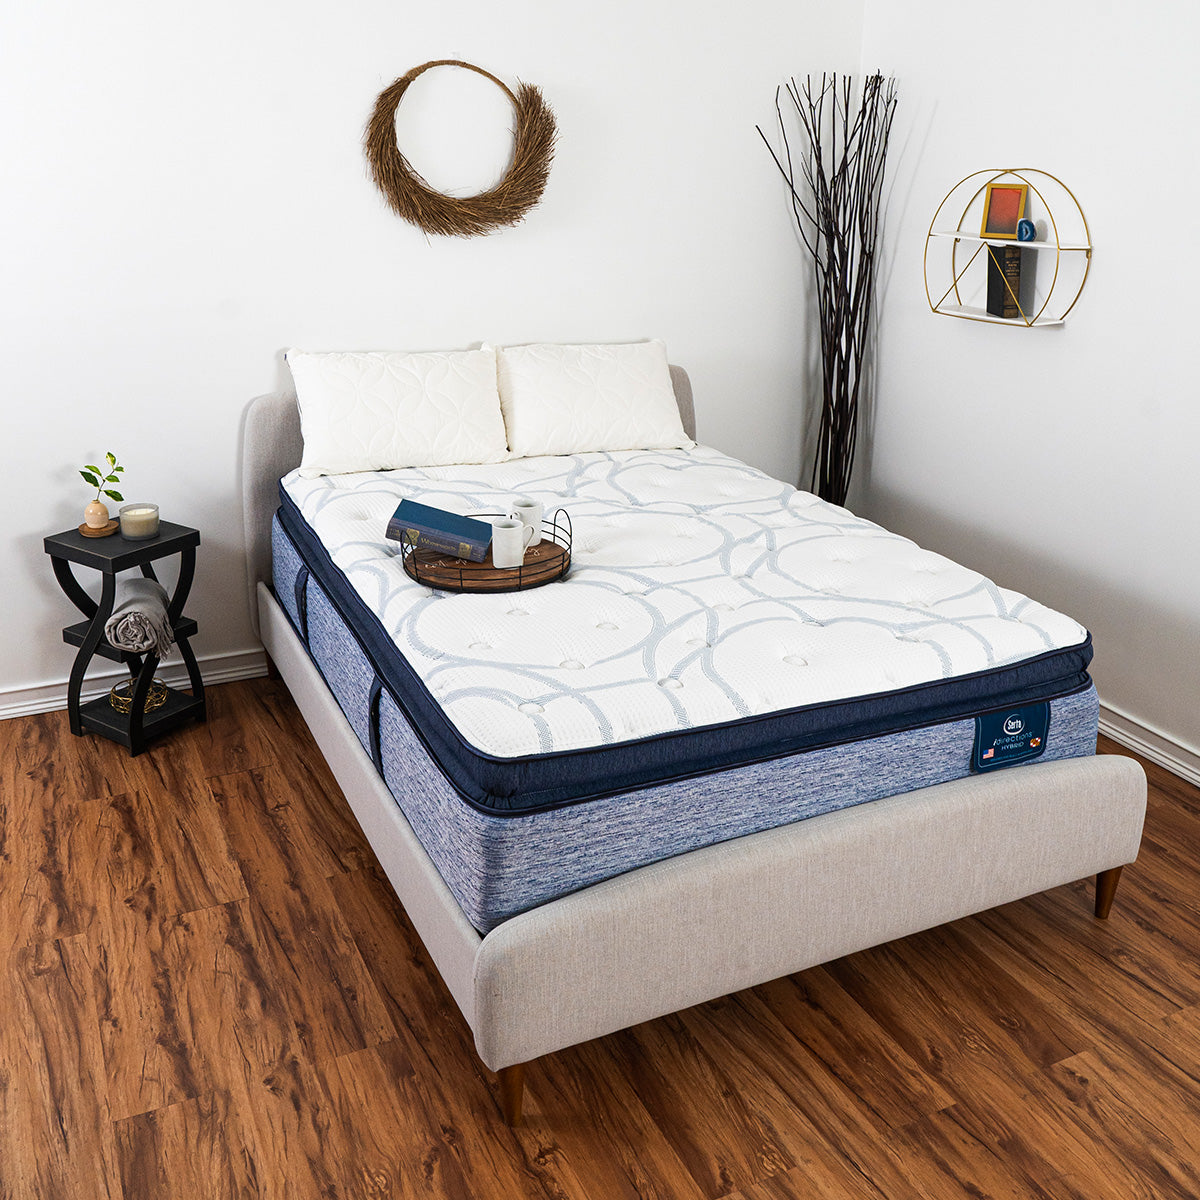 Picture of Floor Model In Store Only - Serta iDirections X5 Hybrid II Plush Pillow Top Mattress